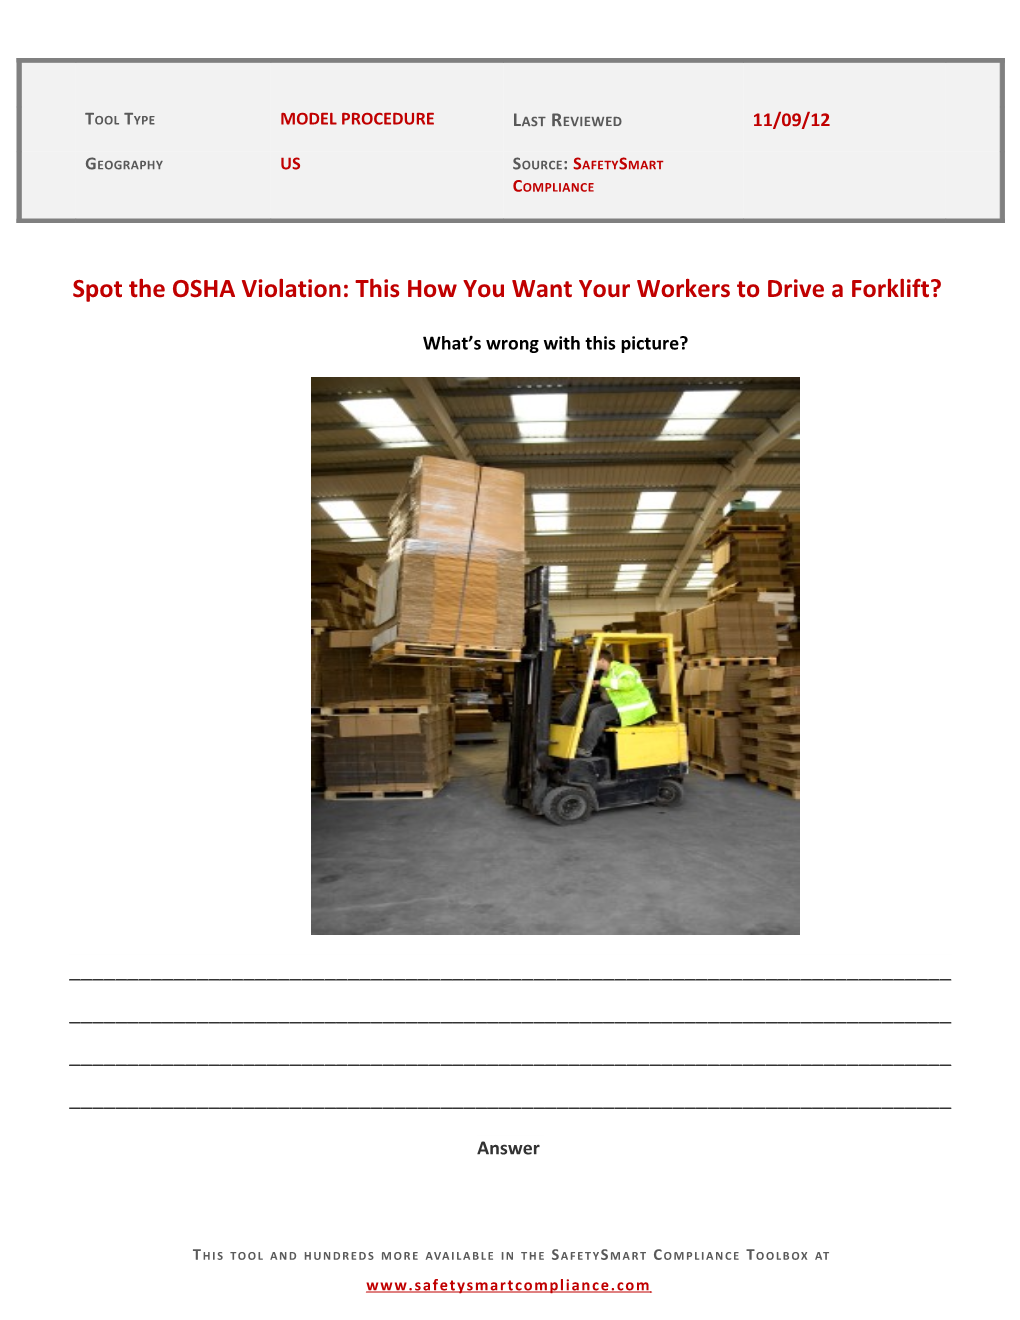 Spot the OSHA Violation: This How You Want Your Workers to Drive a Forklift?